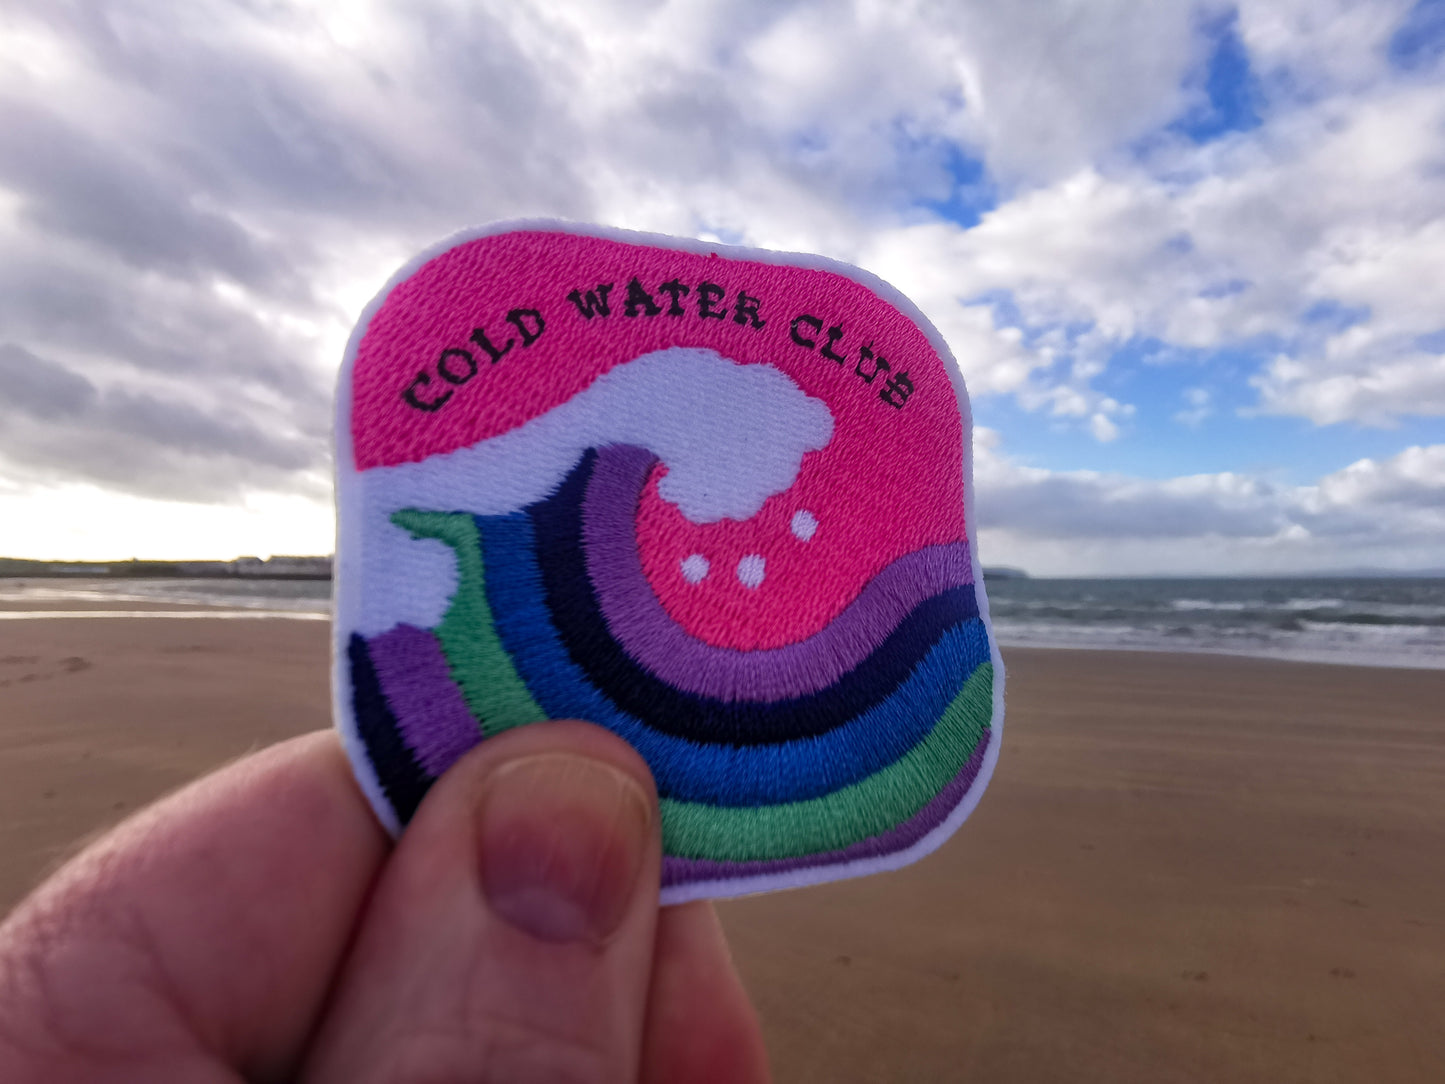 'COLD WATER CLUB' Patch